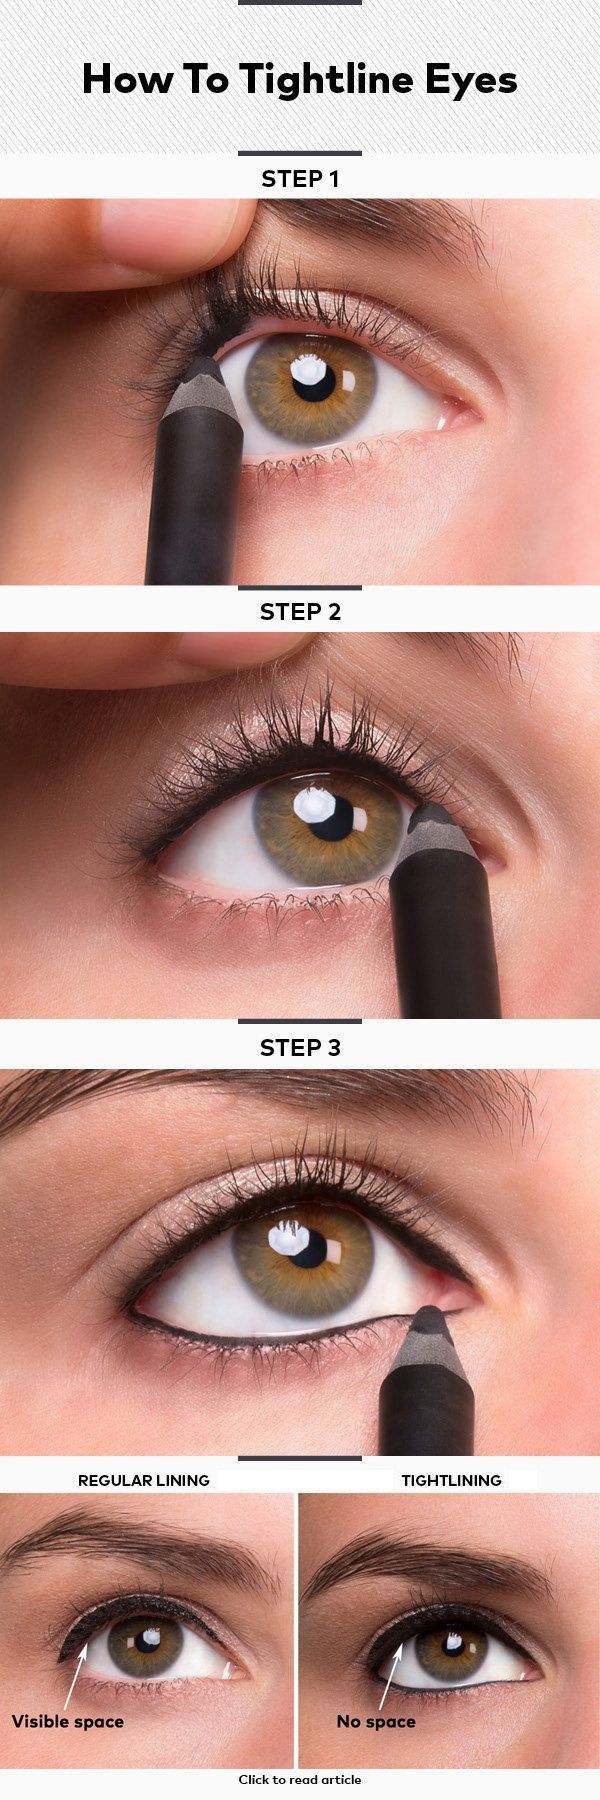 How to Tightline Your Eyes